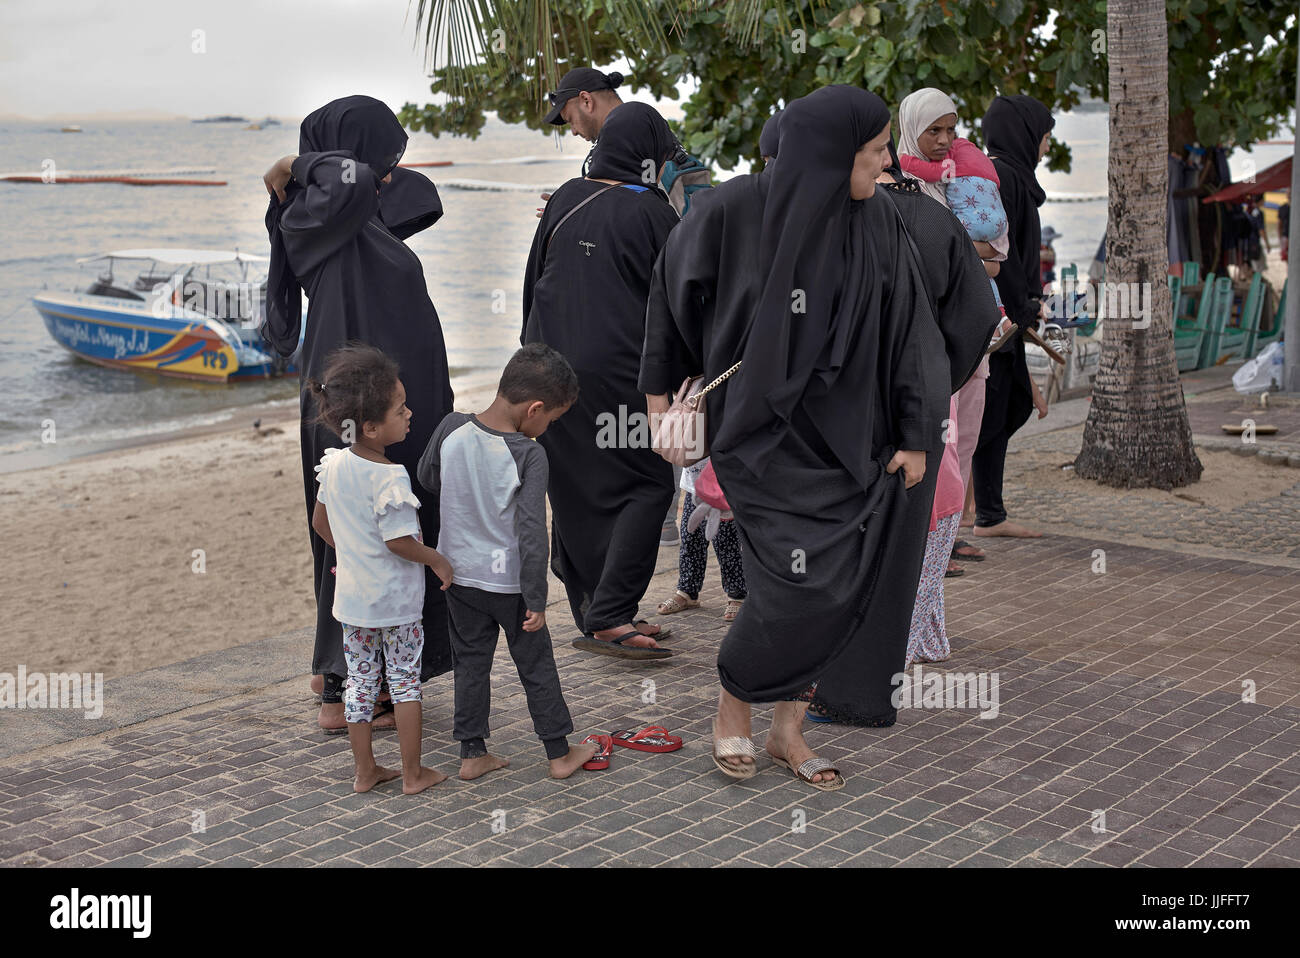 Arab women in traditional Chador attire at the beach. Saudi Arabia woman. Group Middle East females and family. Stock Photo